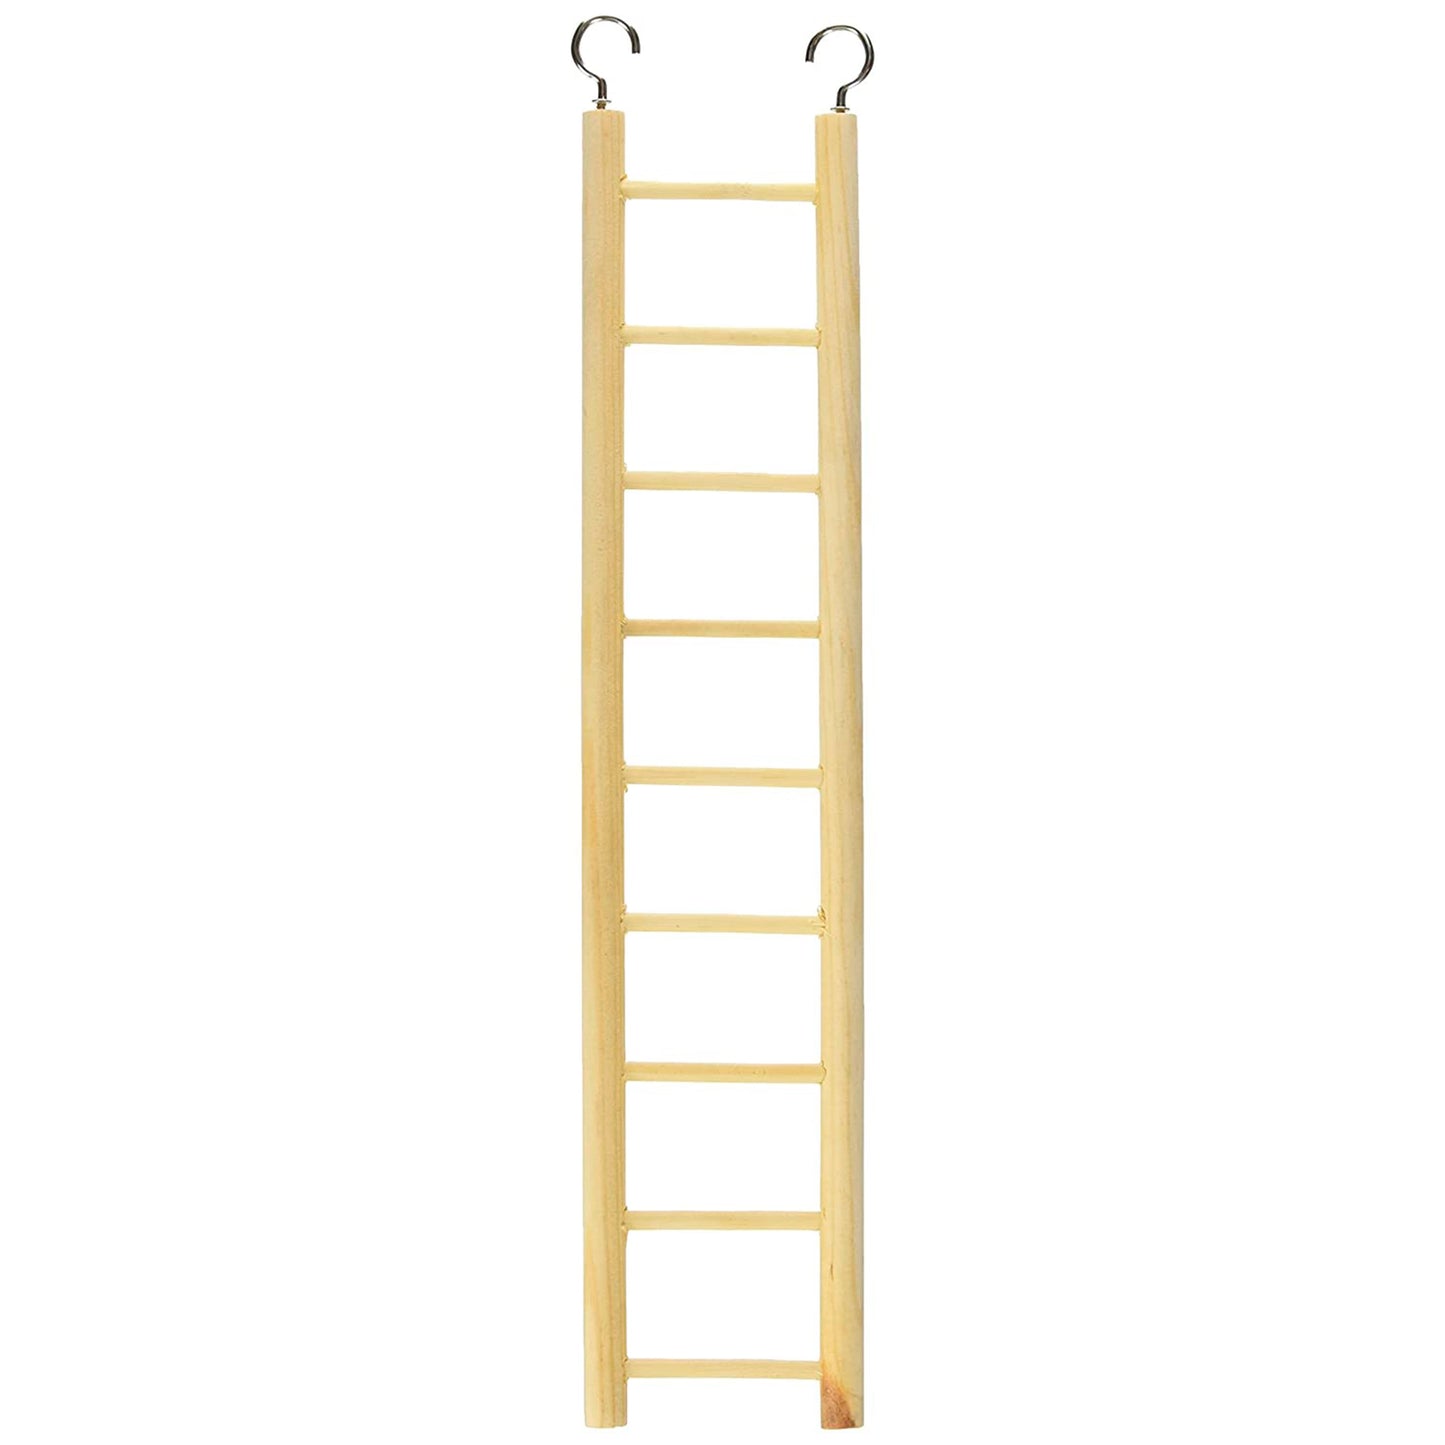 Prevue Pet Products Birdie Basics 9-Rung Ladder Unvarnished Hardwood, 2.88 in X 14 in, Prevue Pet Products